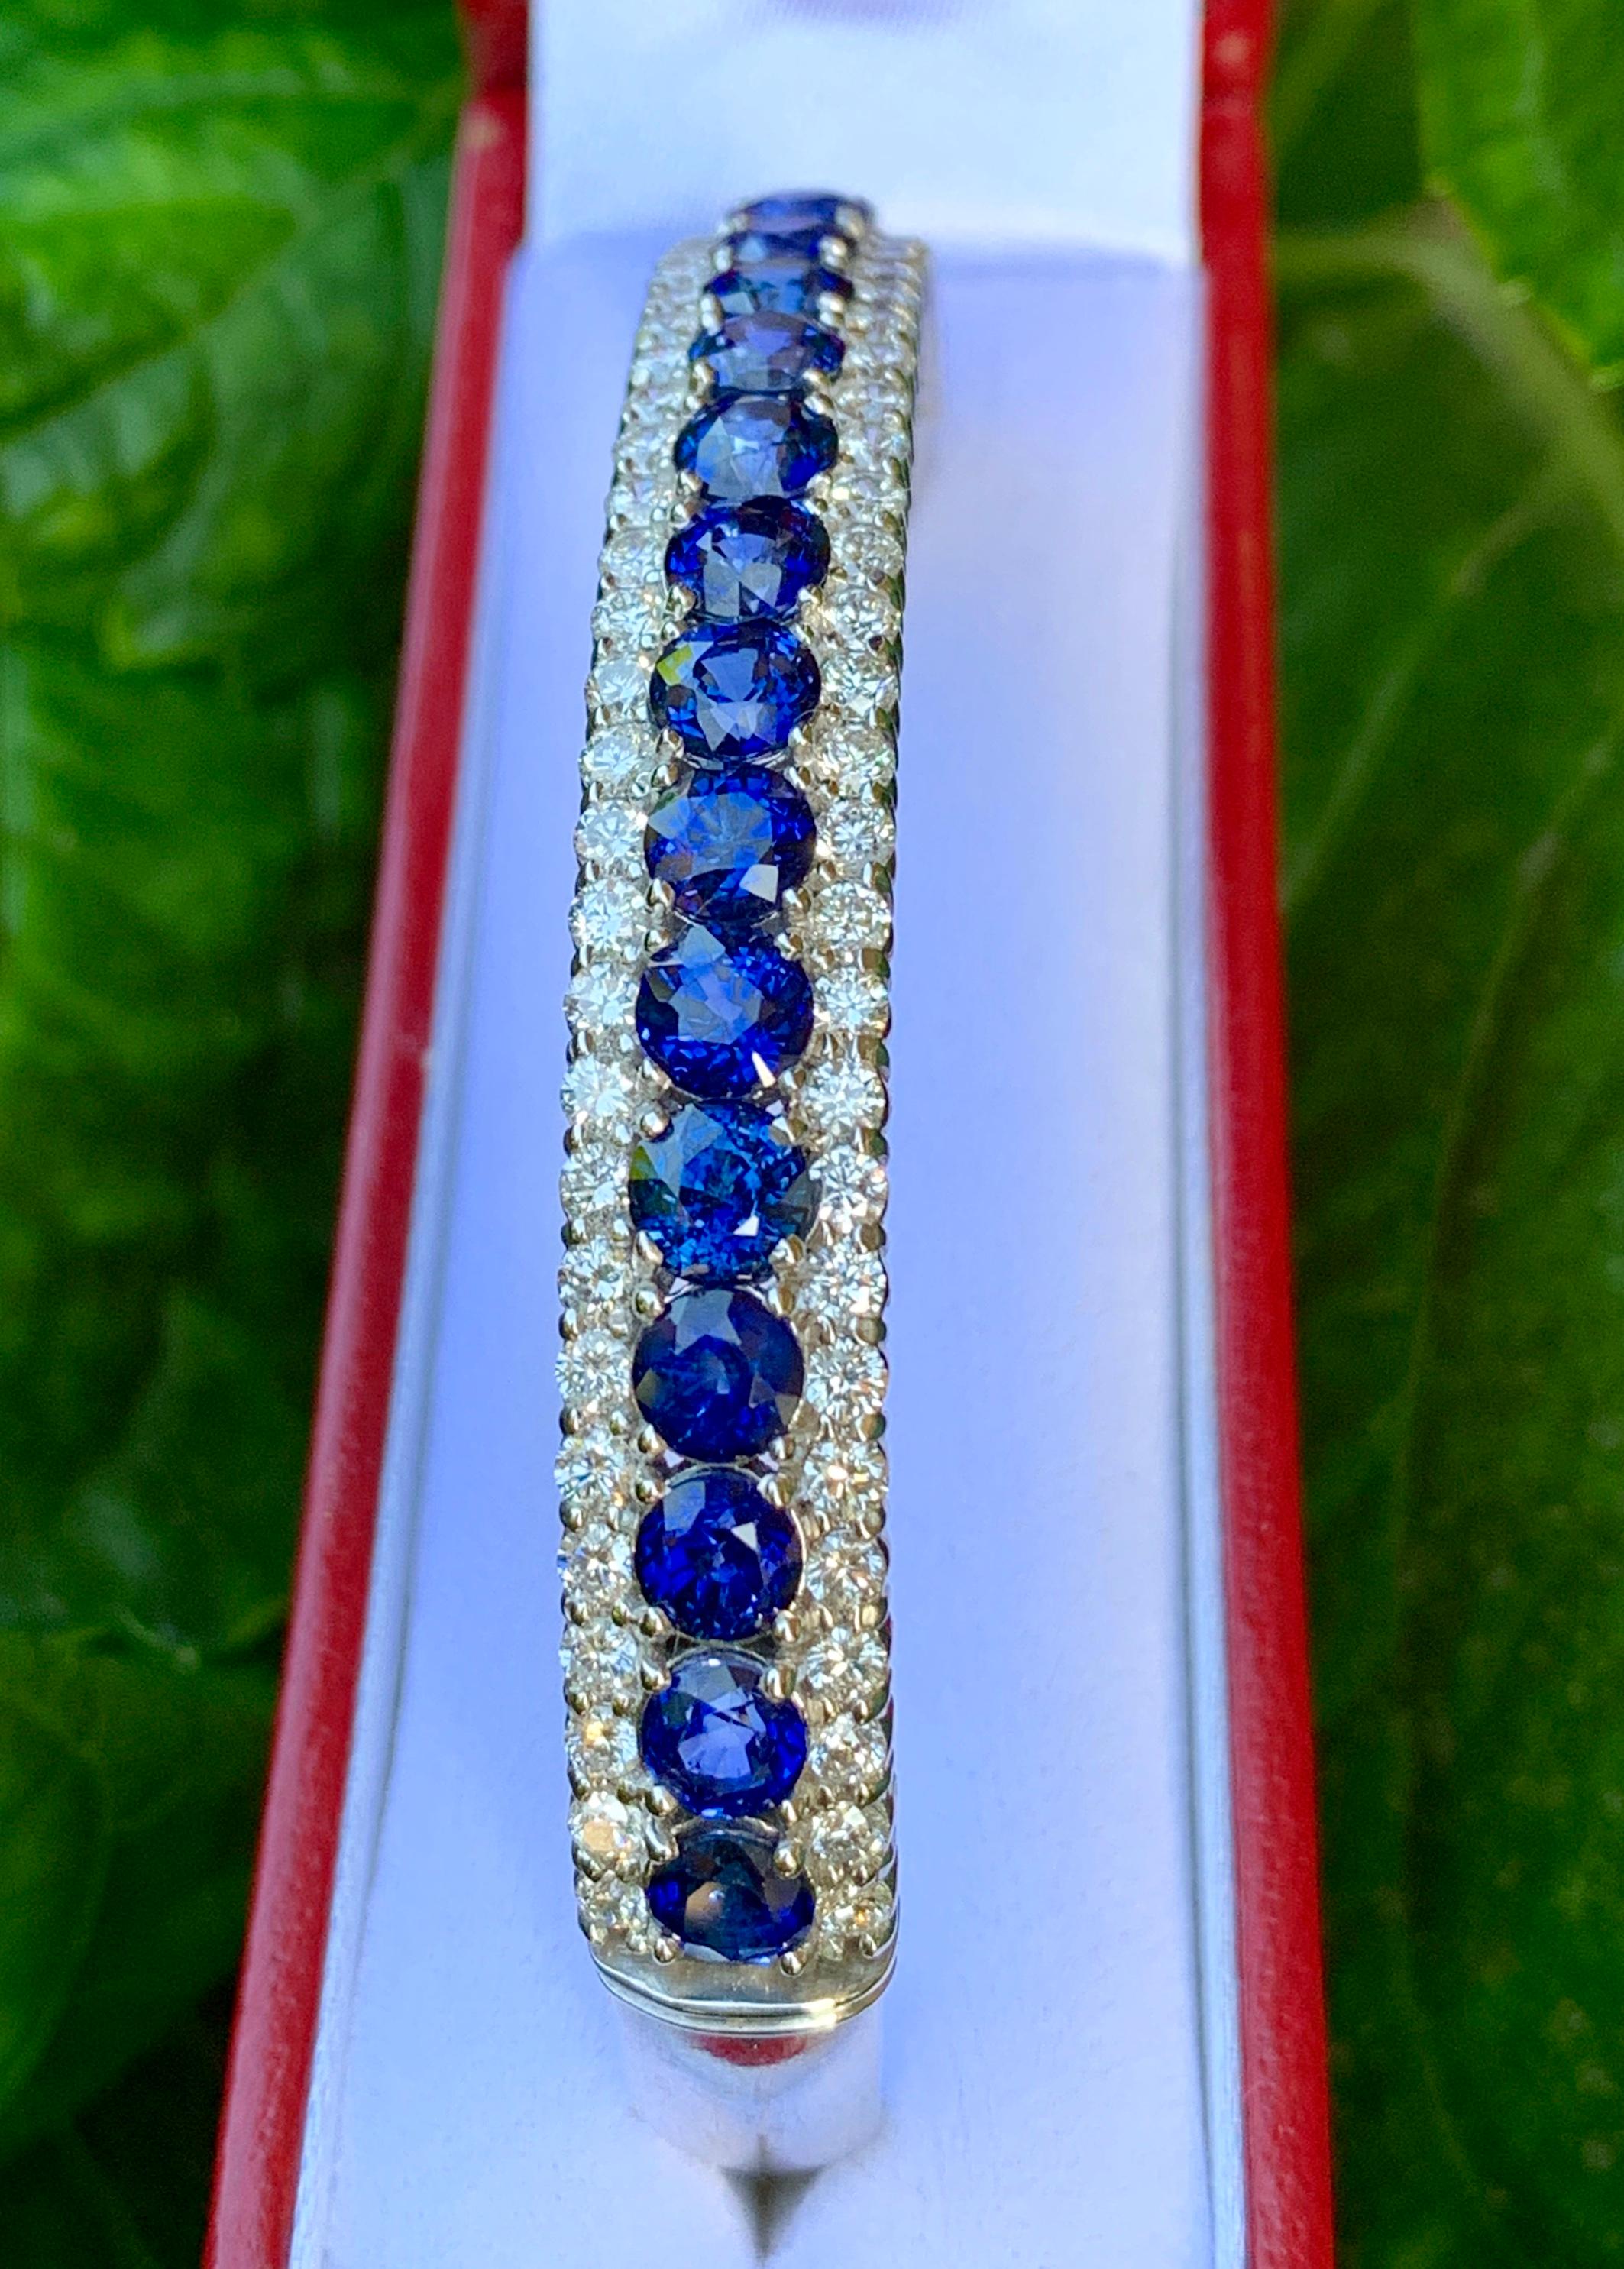 Sparkling sapphire and diamond 18 karat white gold estate hinged bangle bracelet features a row of prong set round blue sapphires centered between two rows of prong set round brilliant diamonds.

18 sapphires graduate in size from 4.4 mm to 4.9 mm